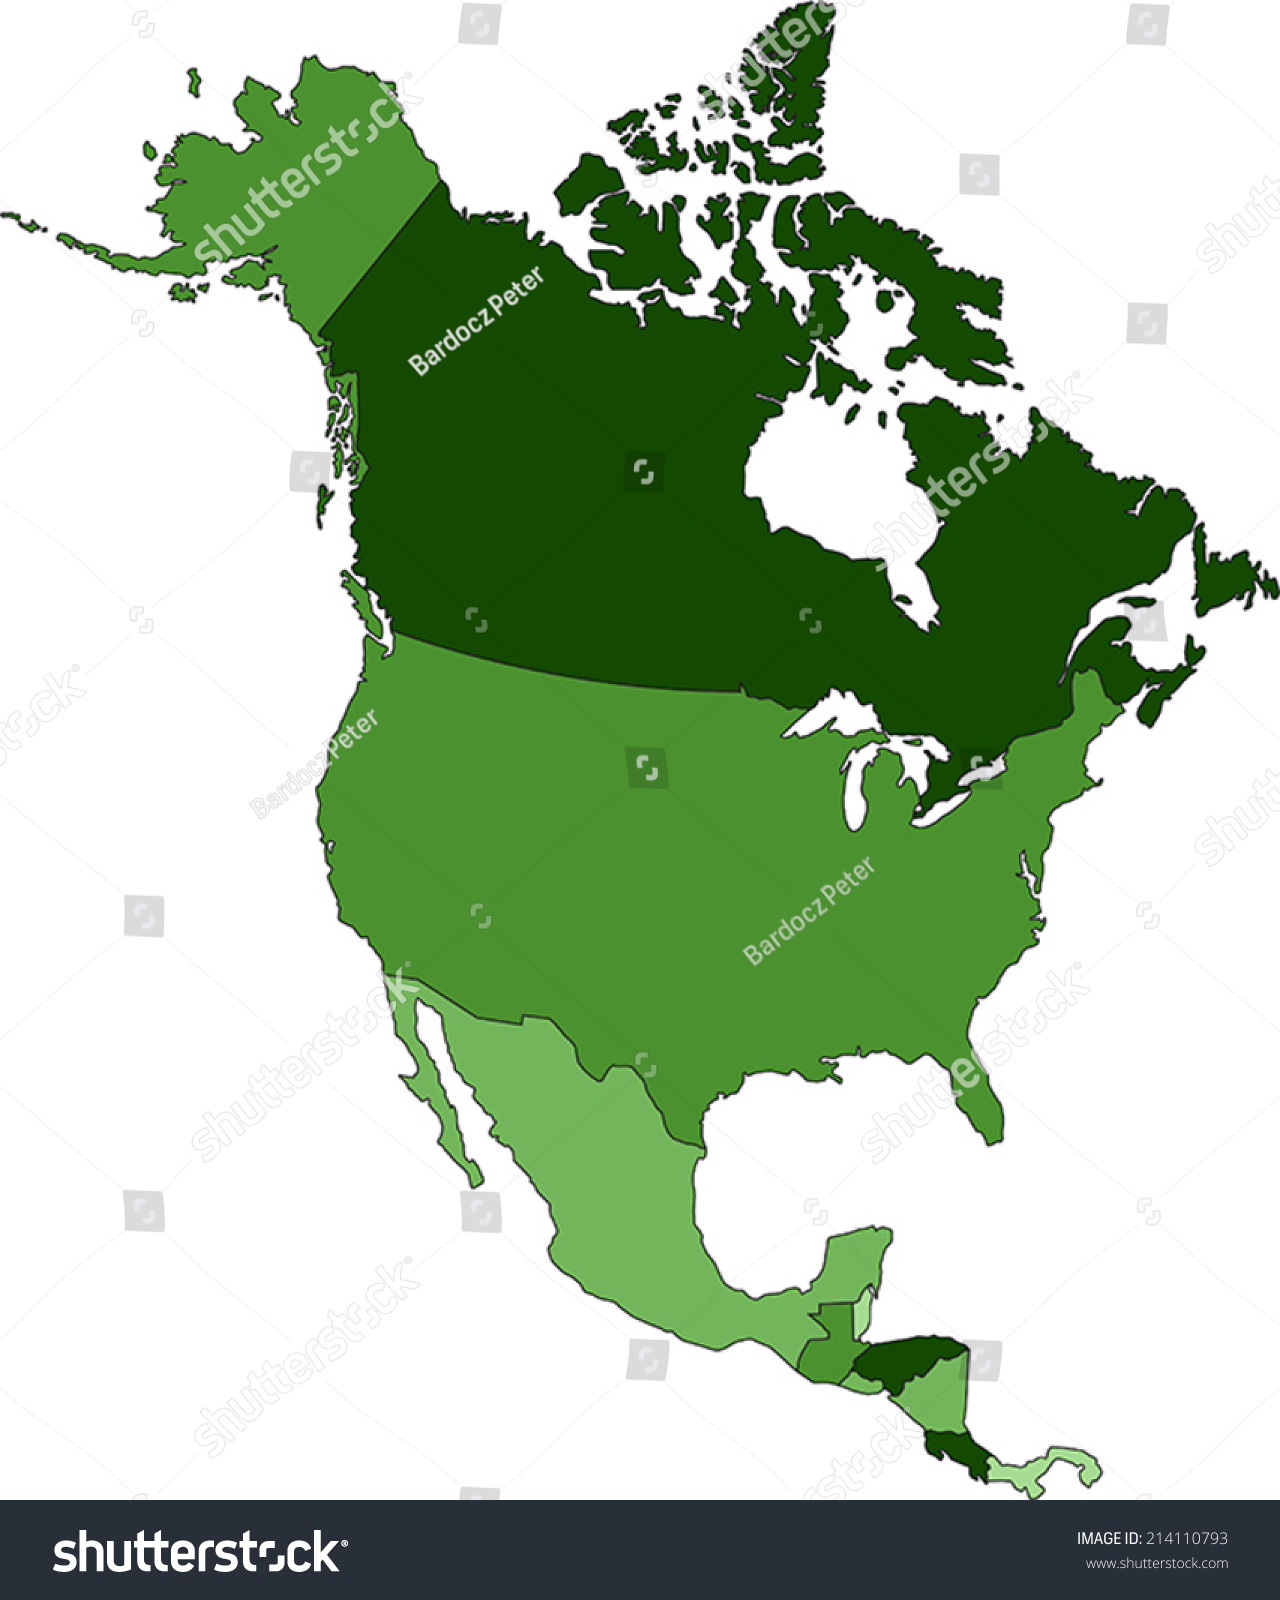 Highly Detailed North America Political Map Stock Vector Royalty Free 214110793 Shutterstock 0724